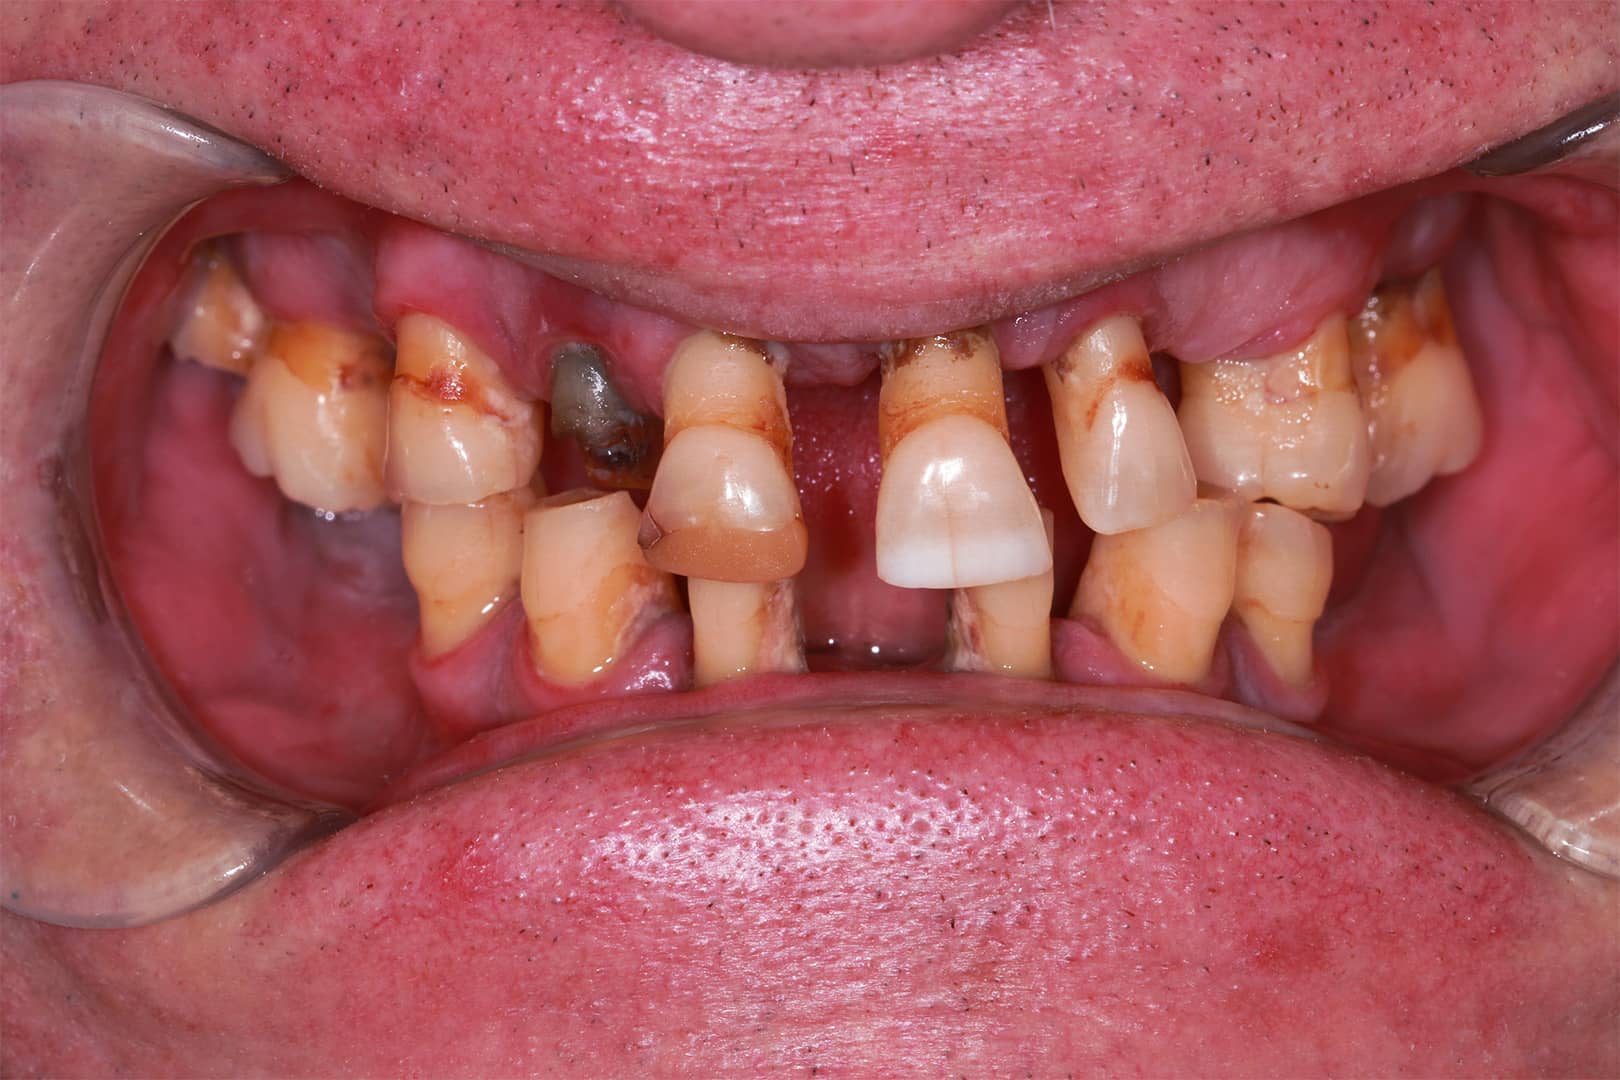 Remy Full Dentures great transformation before Results - See the Gallery of Before and After